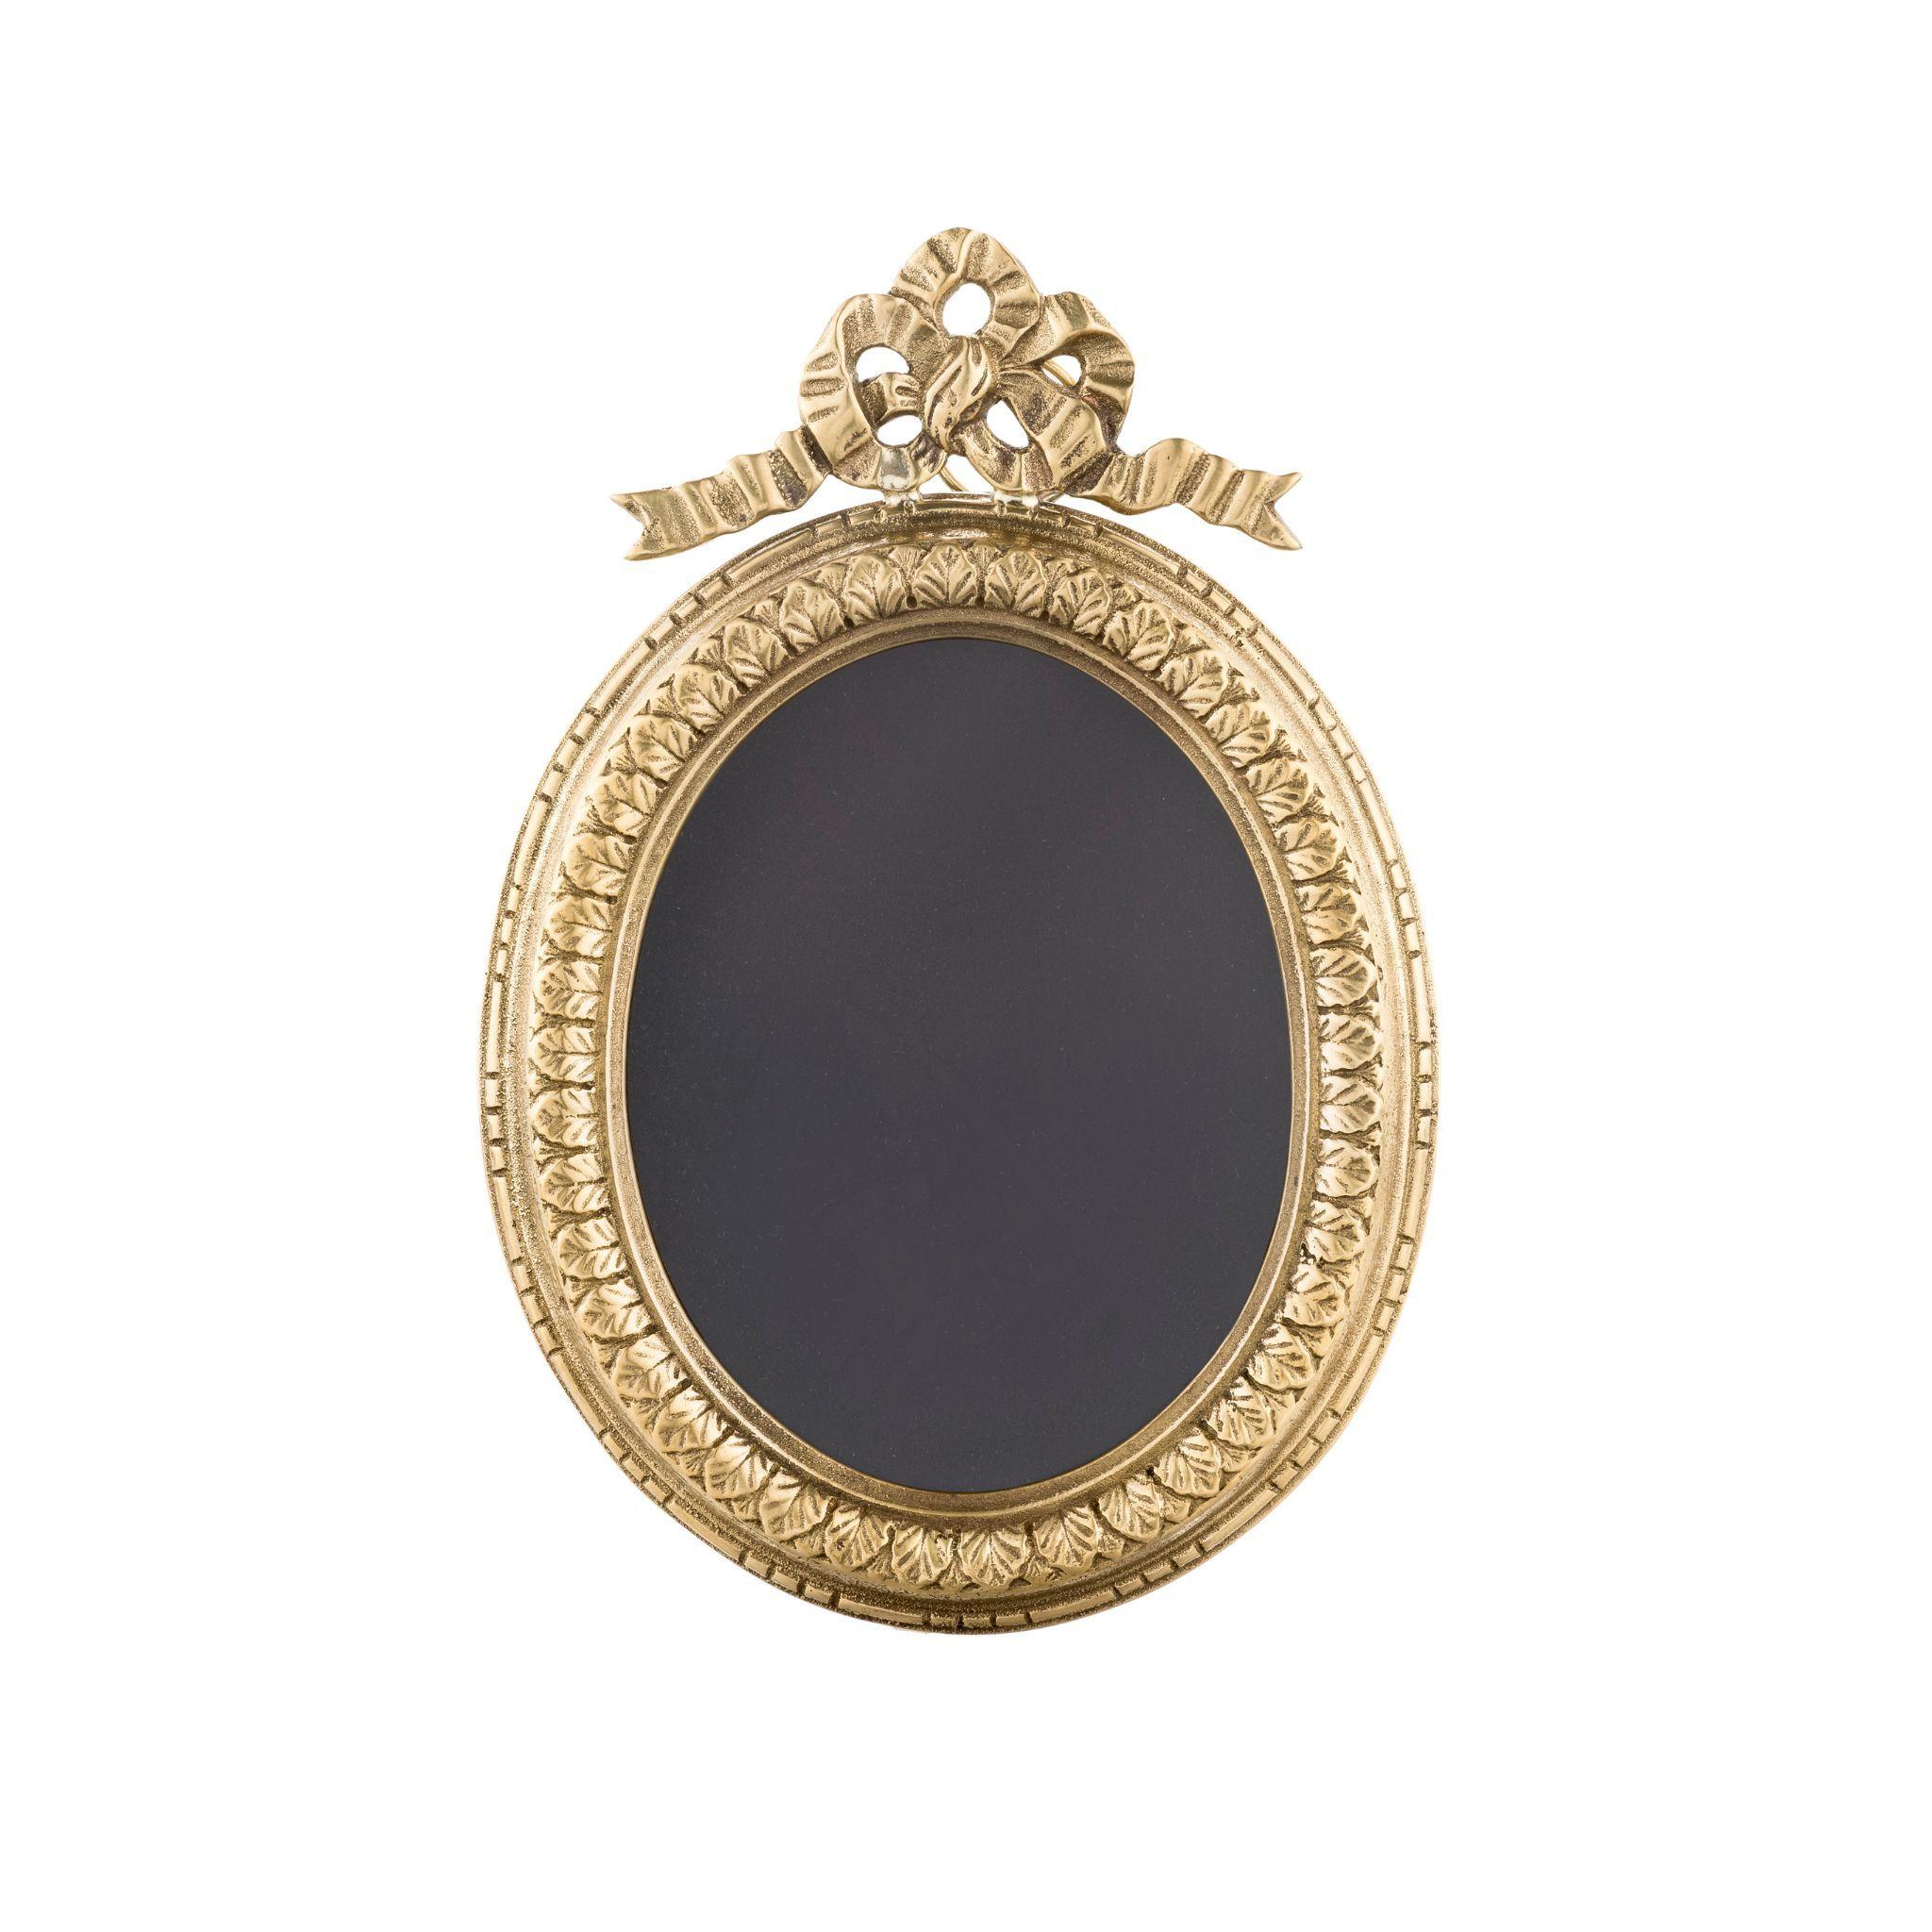 Add a touch of vintage charm to your home with our beautiful decorated brass frame with ribbon. Crafted from high-quality brass, this unique and elegant frame features a lovely ribbon design that complements any decor style. Perfect for displaying